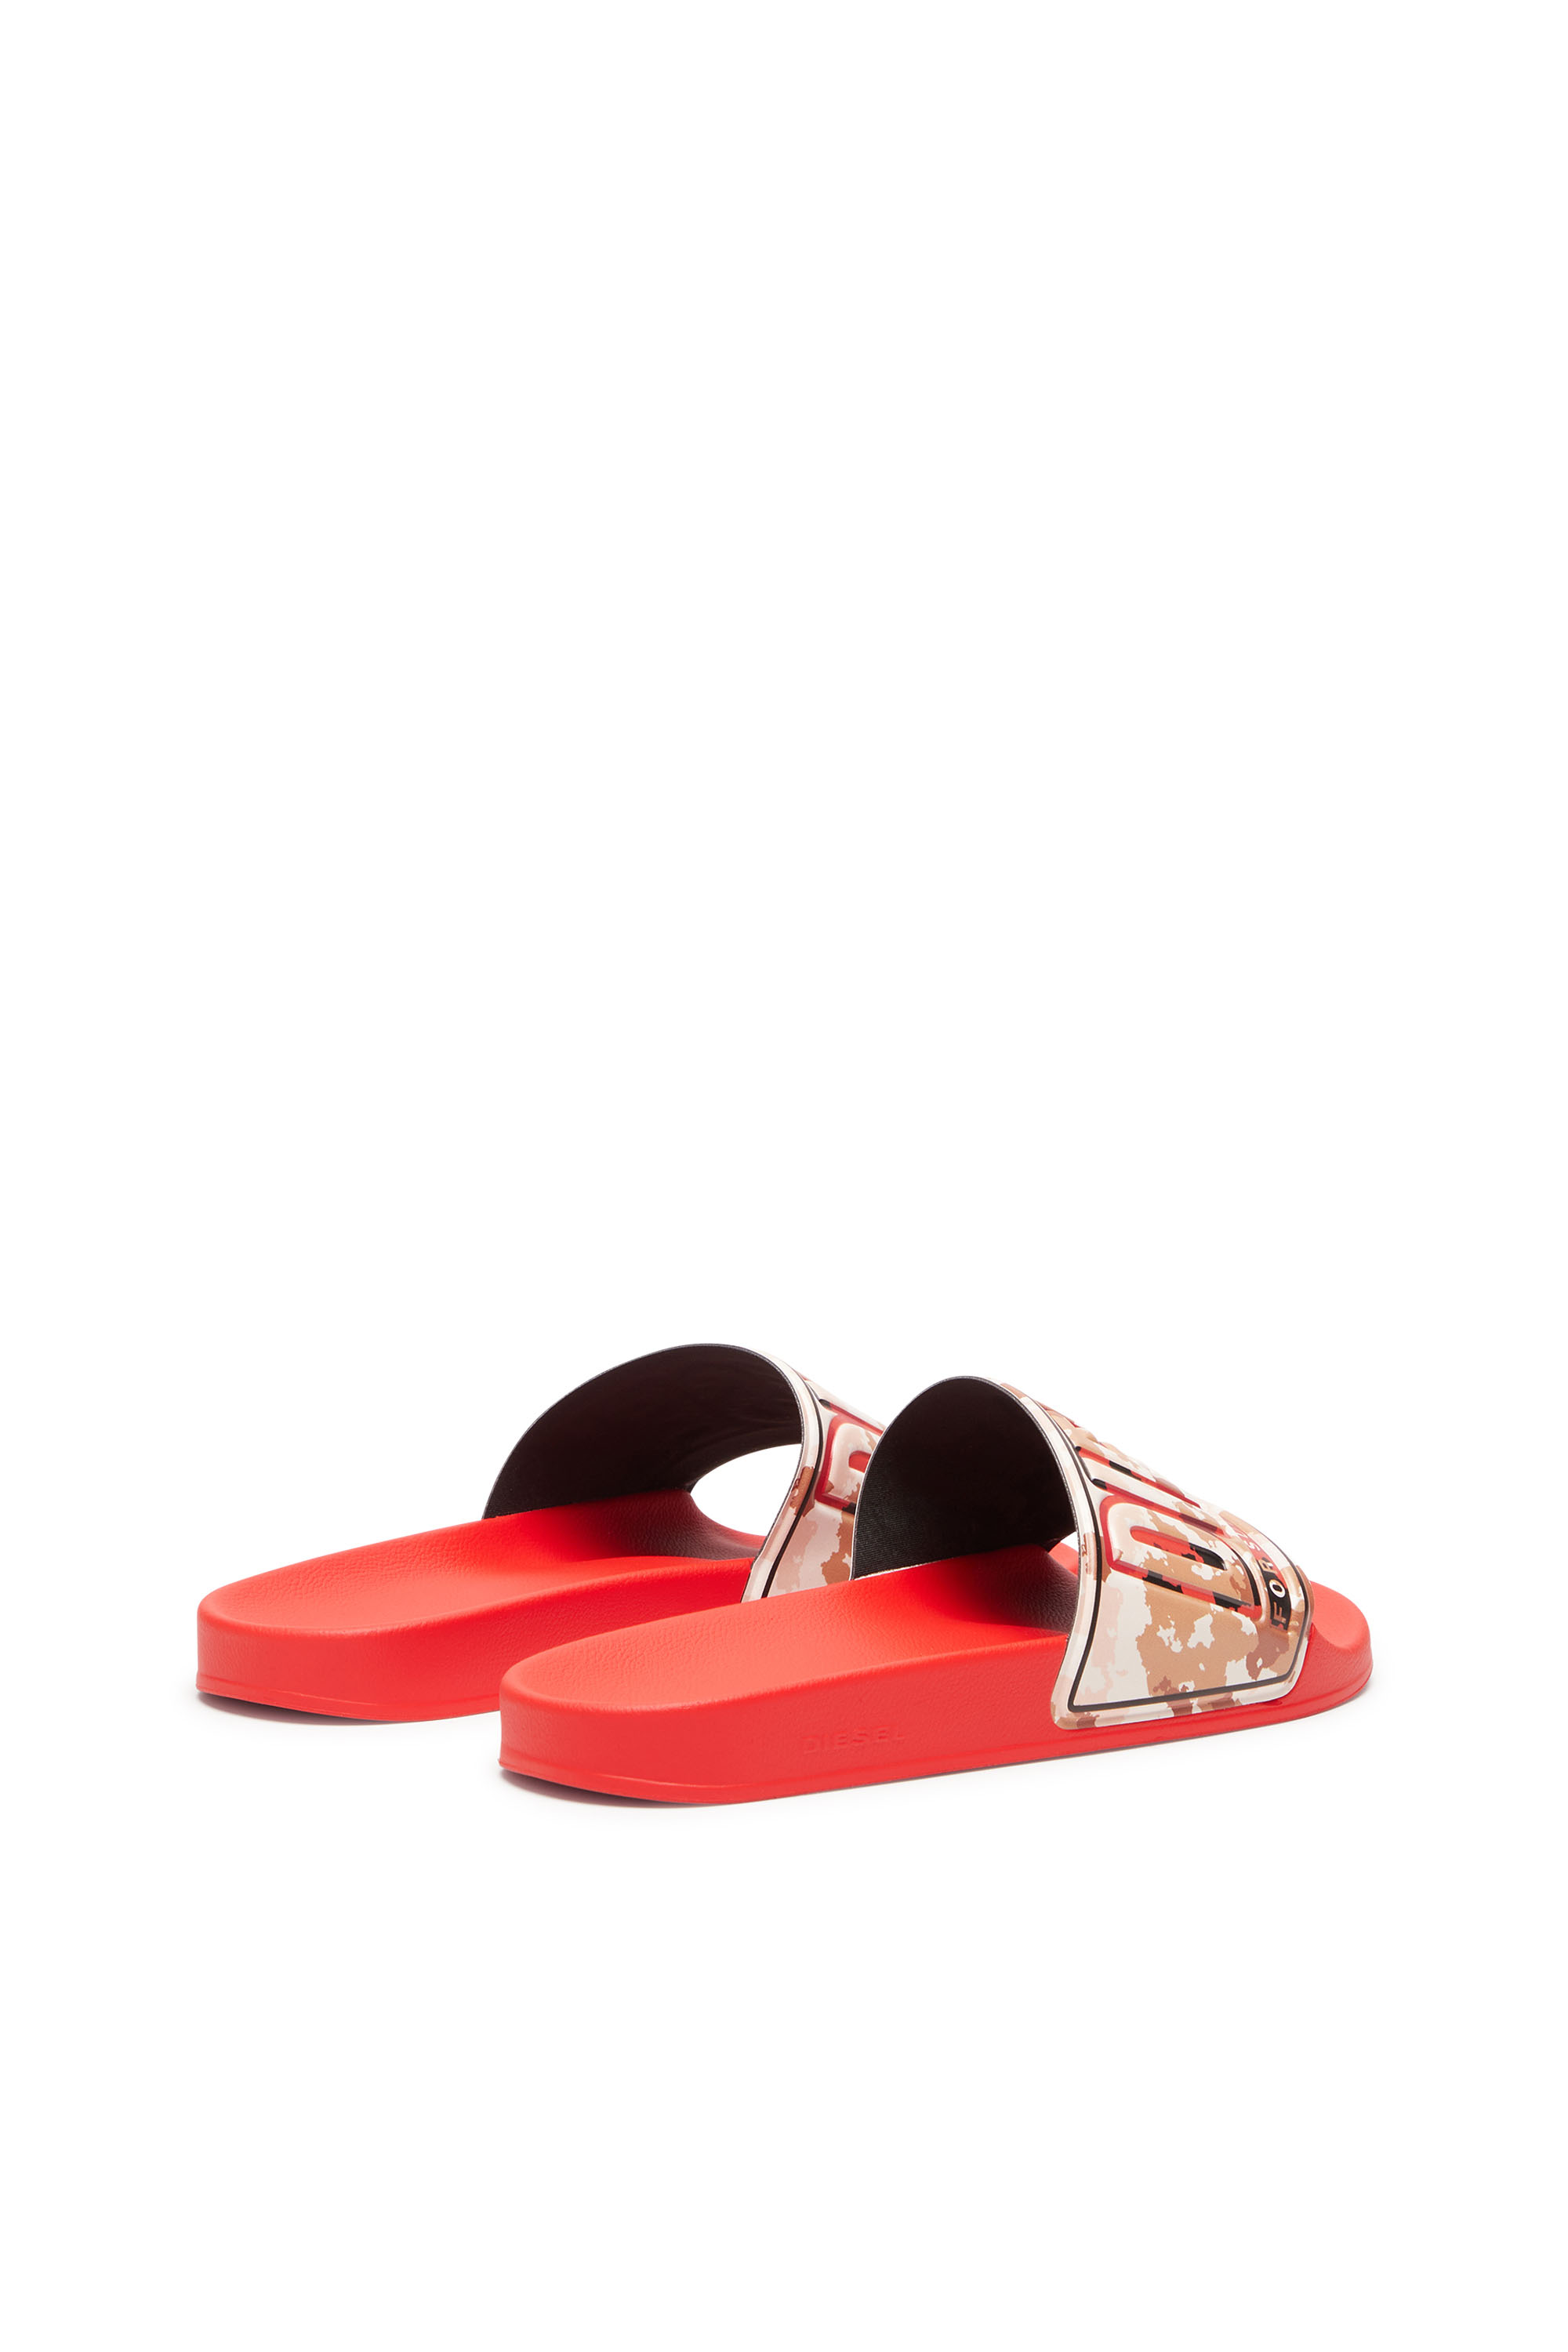 Diesel - SA-MAYEMI CC X, Unisex Sa-Mayemi CC X - Pool slides with camouflage band in Red - Image 3